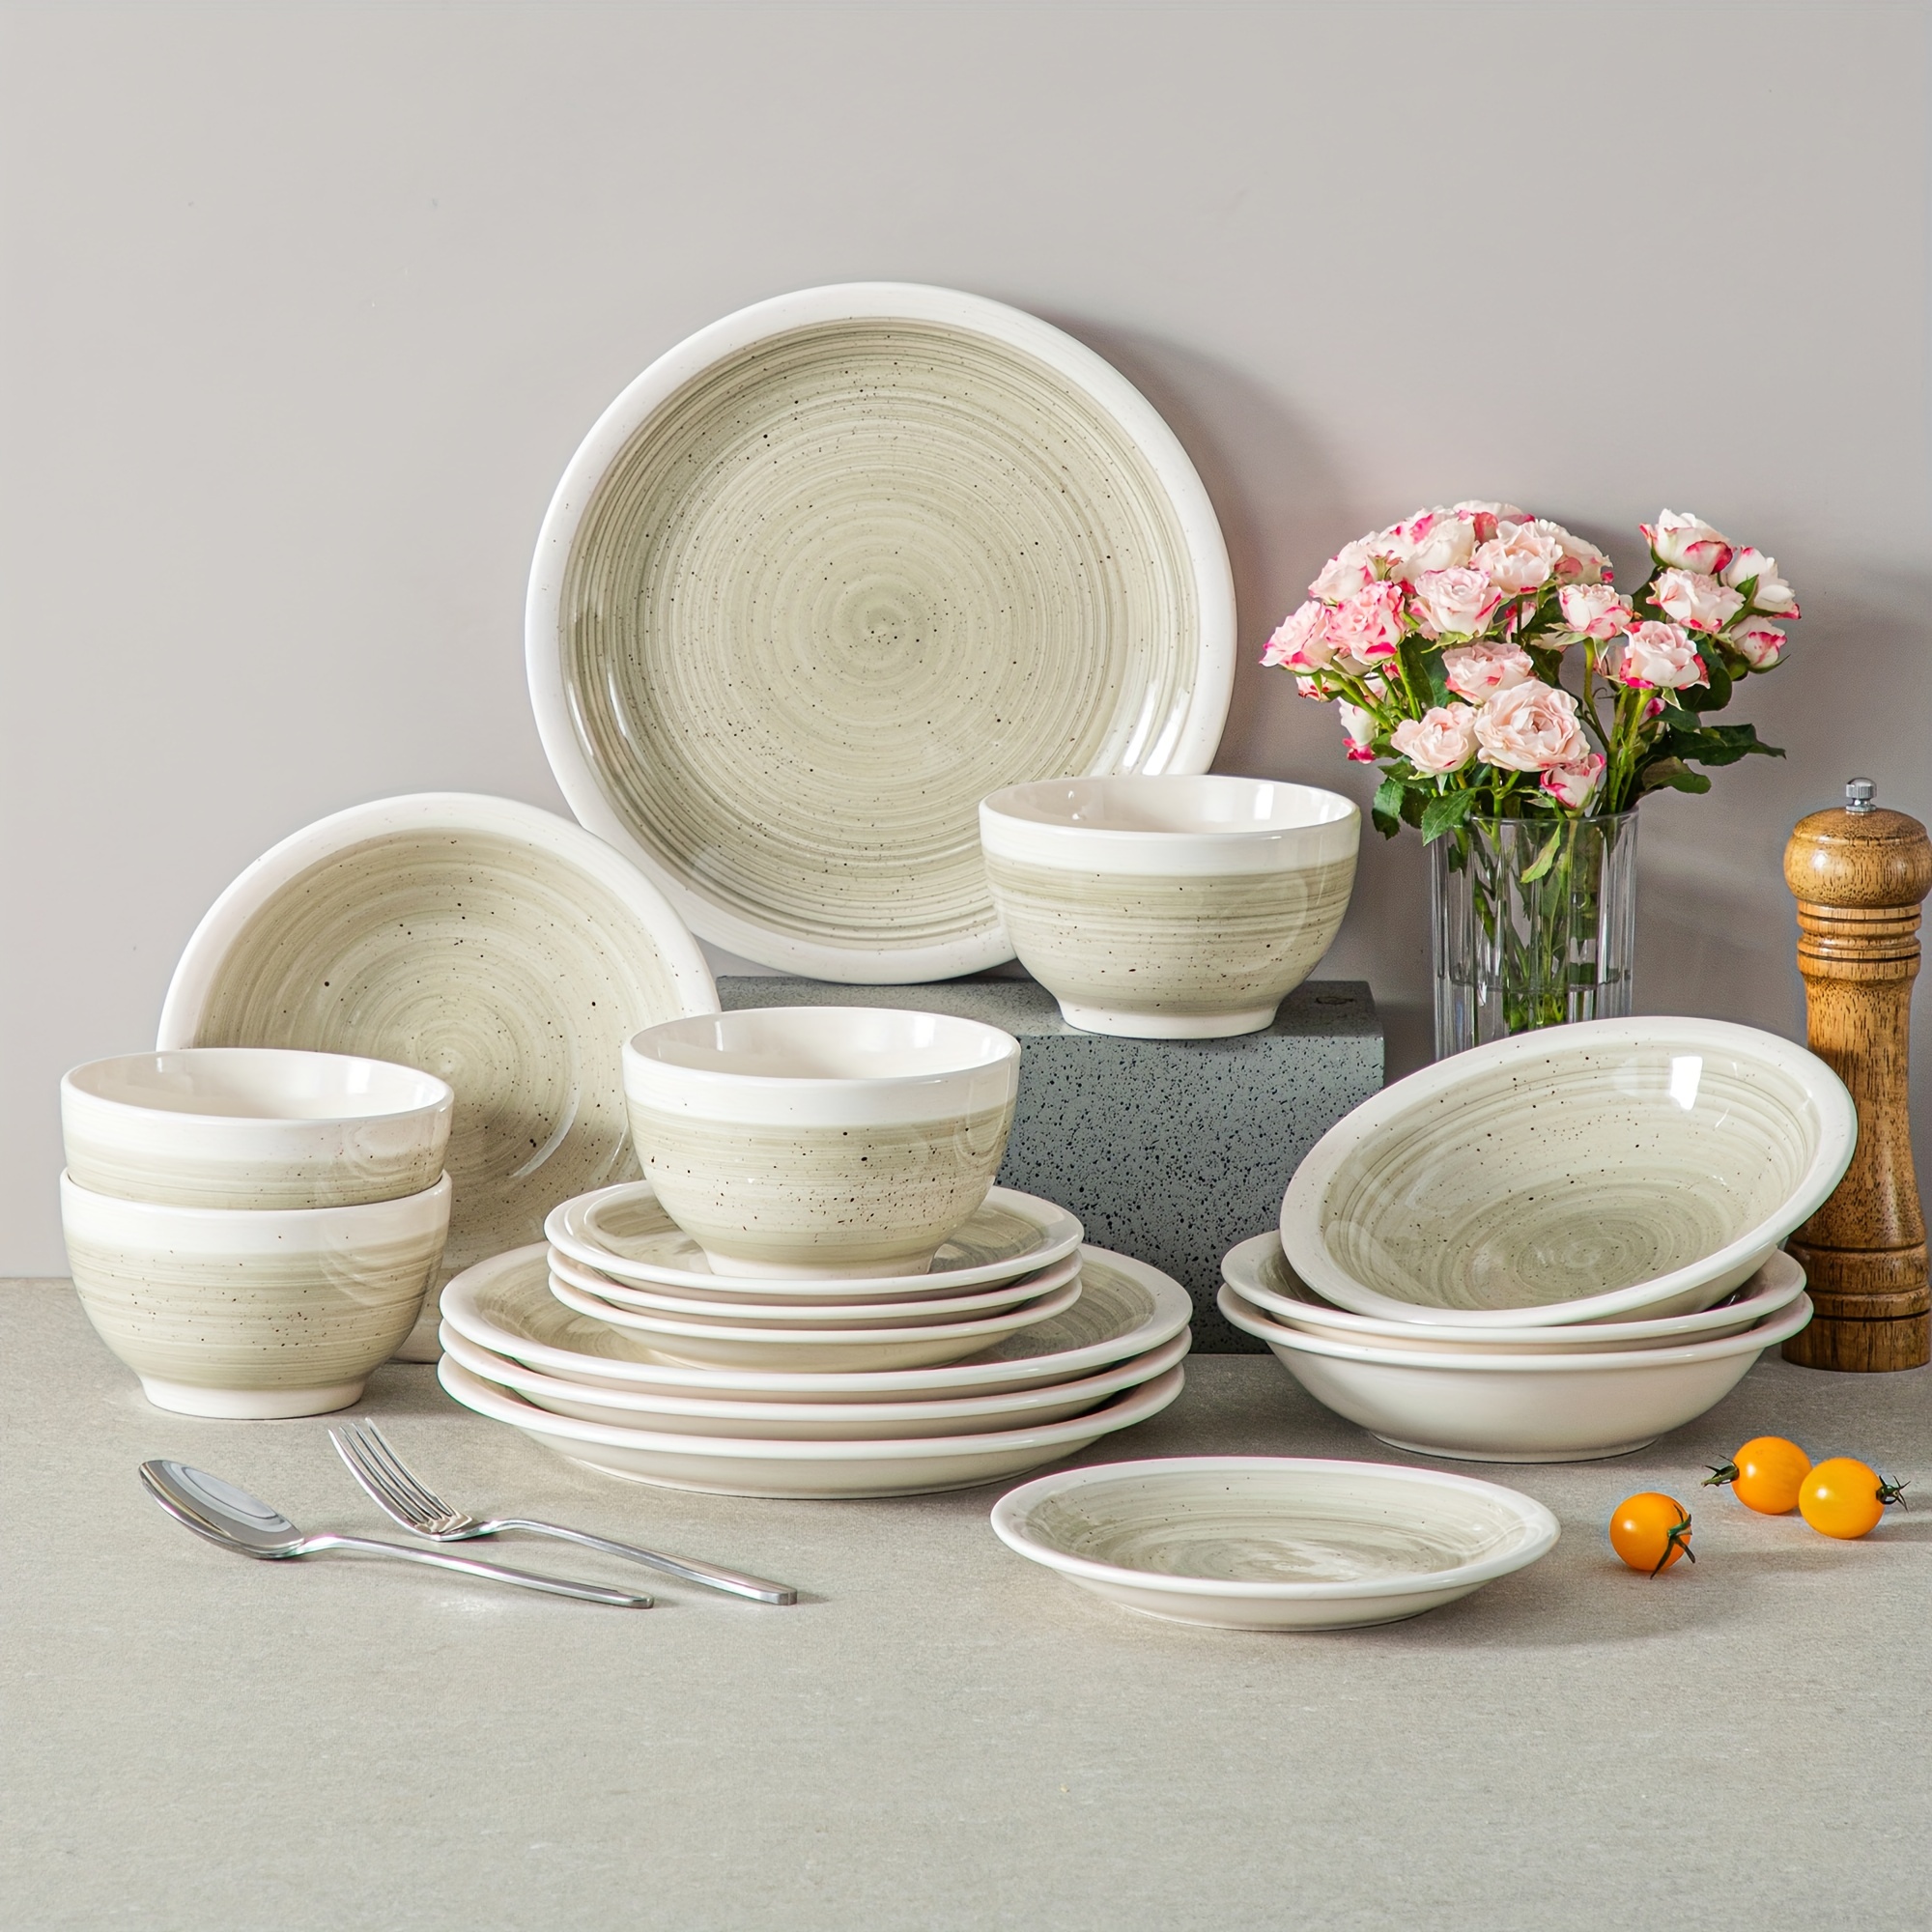 

16pcs Dinnerware Se, Beige Tableware, Porcelain Dining Set, Reusable And Washable Plate Bowl , For Home Kitchen, Restaurant, Party And Holiday, Kitchen Organizers And Storage, Kitchen Accessories